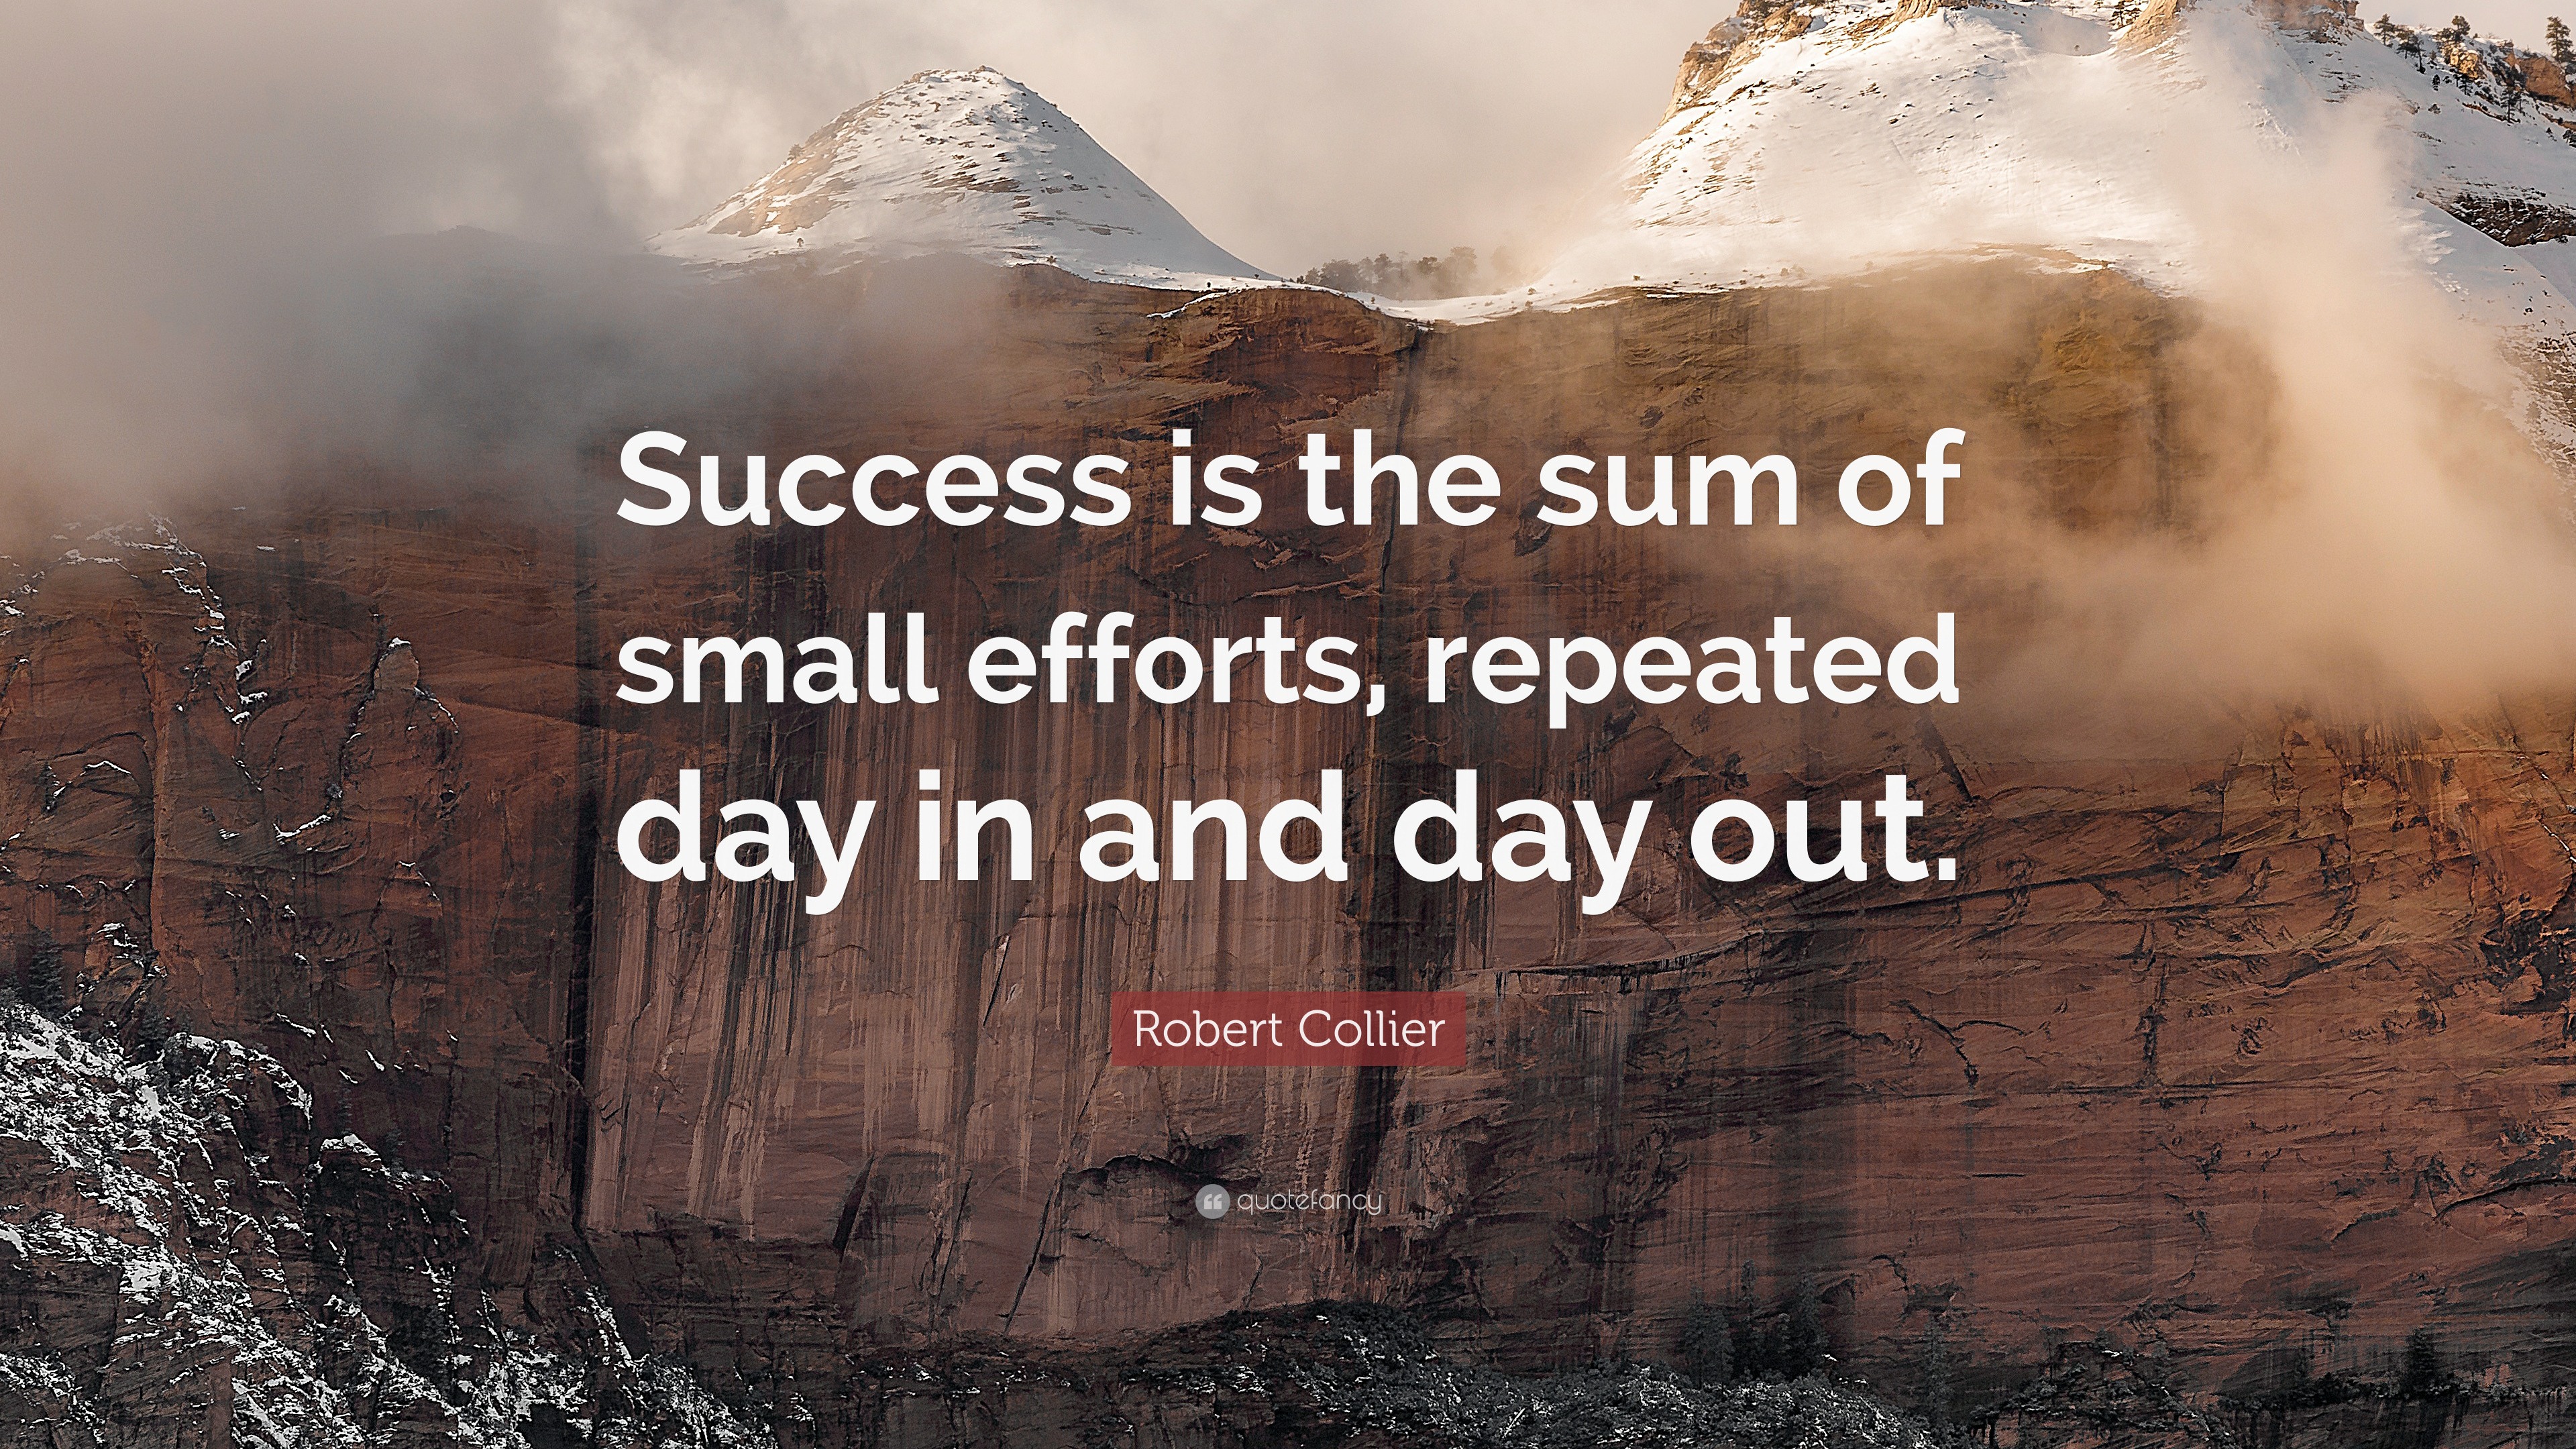 Robert Collier Quote: “Success is the sum of small efforts, repeated ...